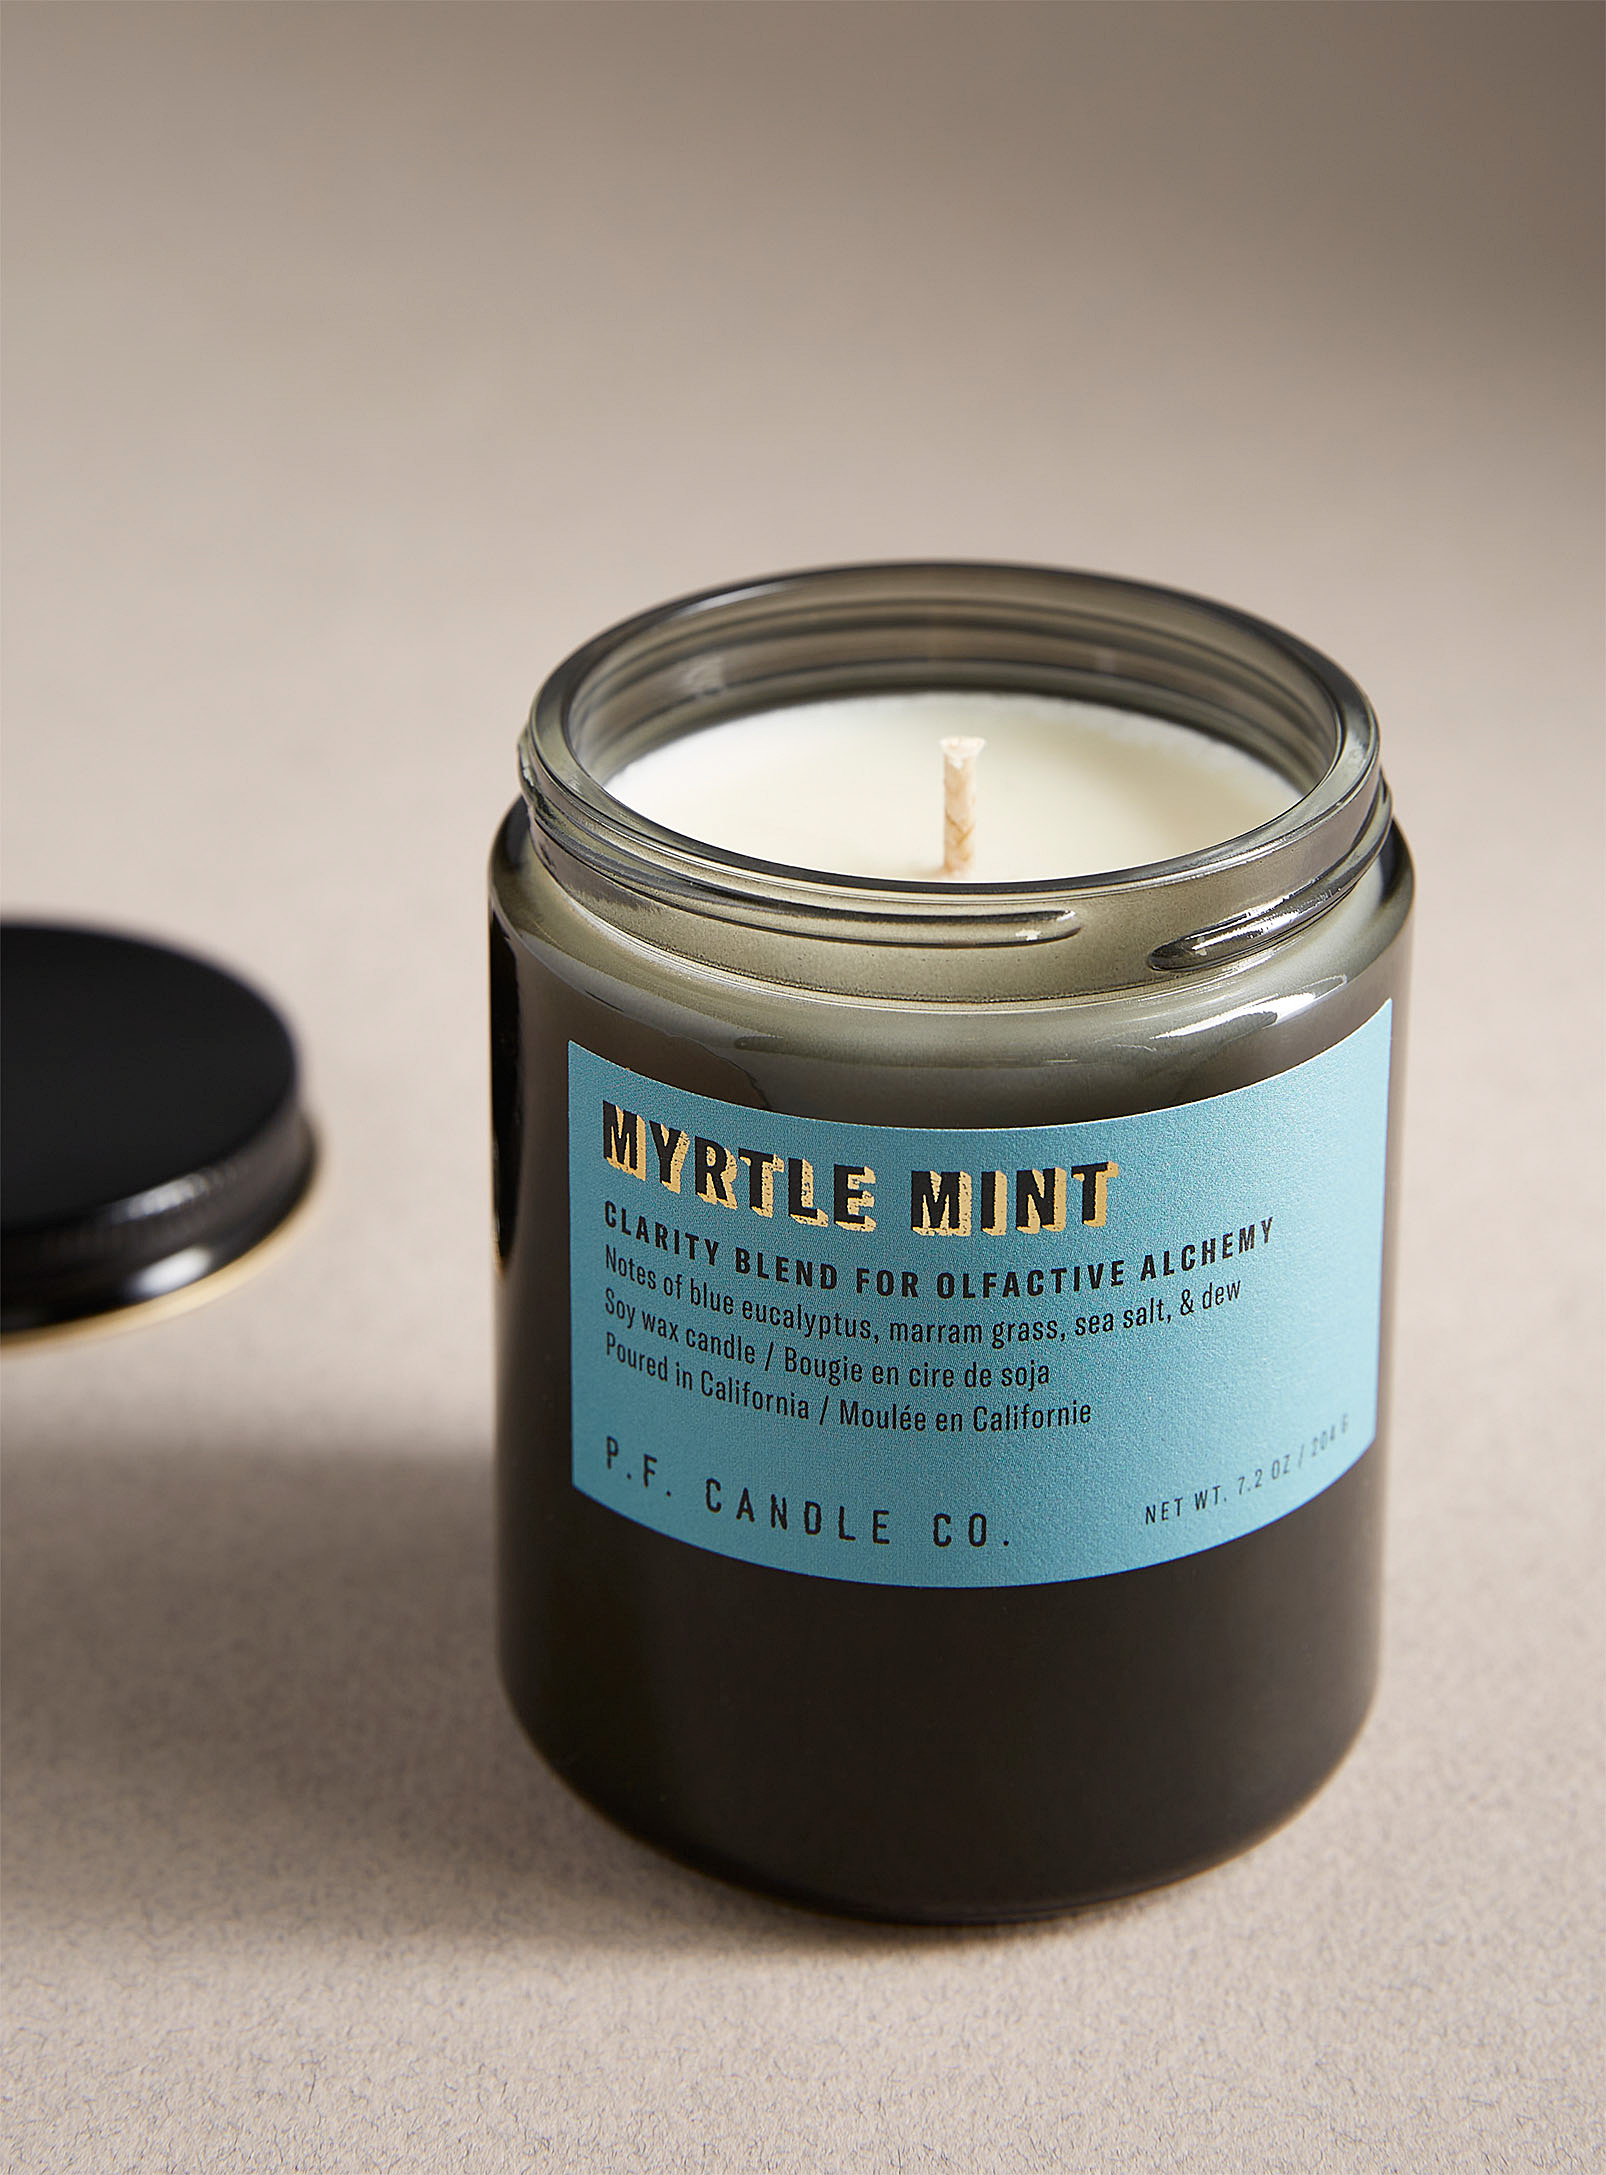 P.F. Candle Co. - Myrtle Mint scented candle